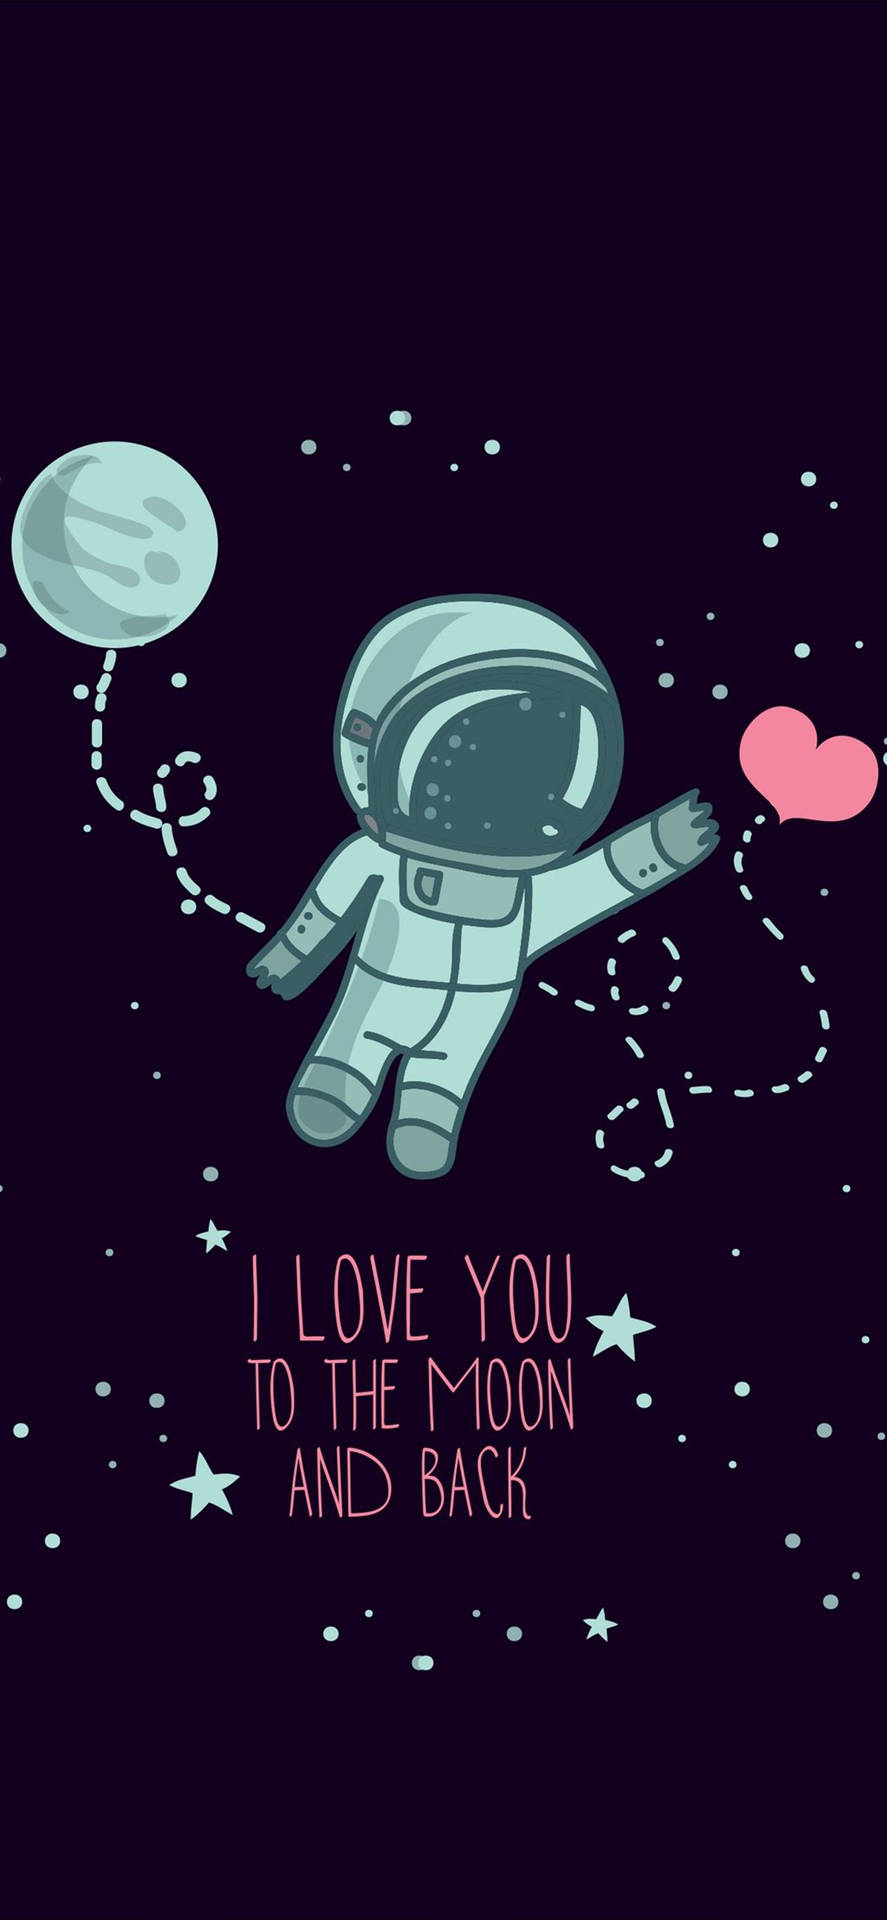 Cartoon Astronaut Love You To The Moon Background